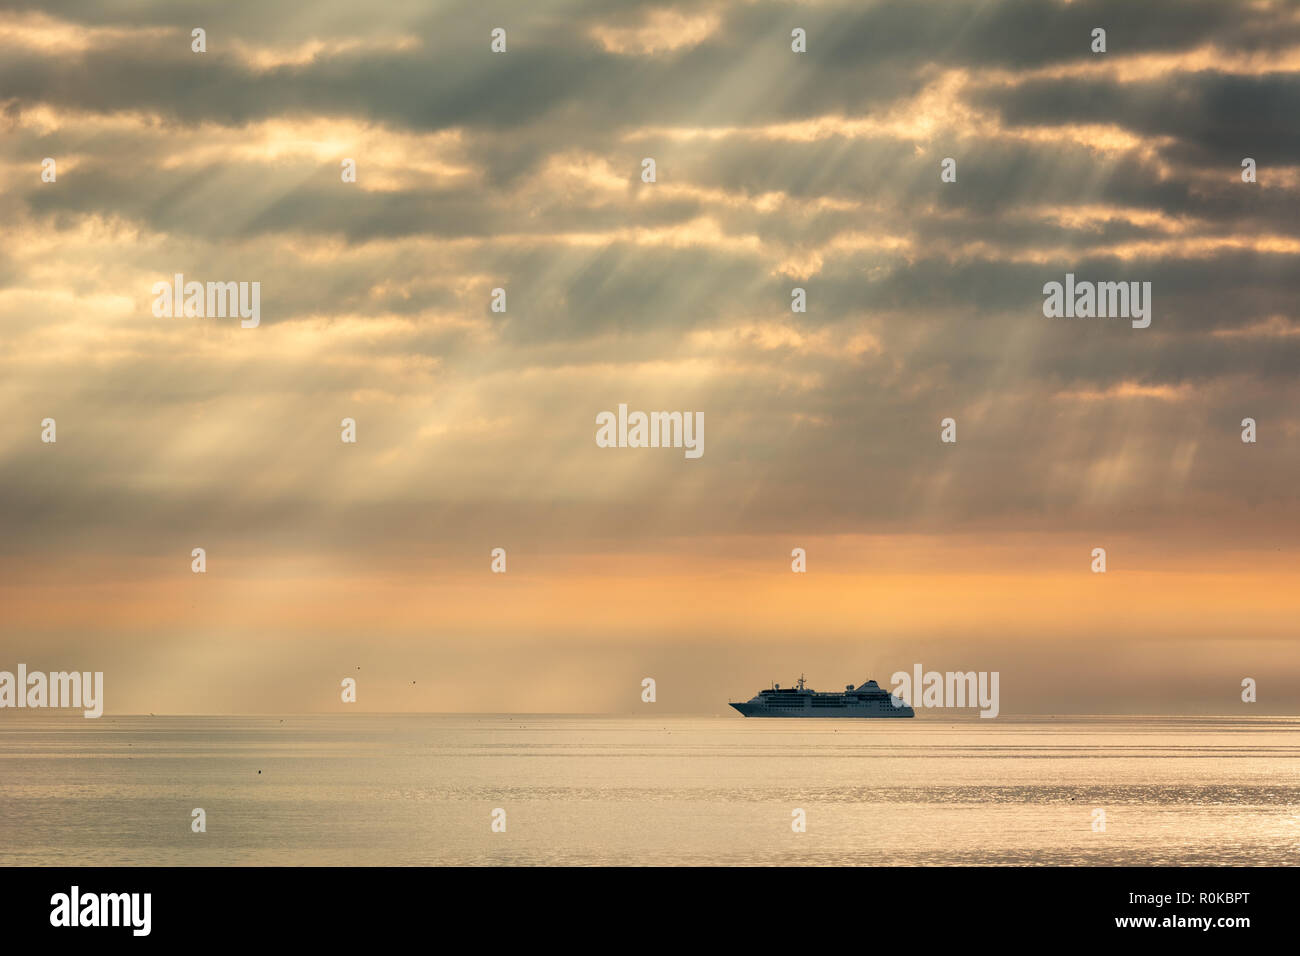 Silhouette of Ferry in Shafts of Morning Light on Dublin Bay in Ireland Stock Photo